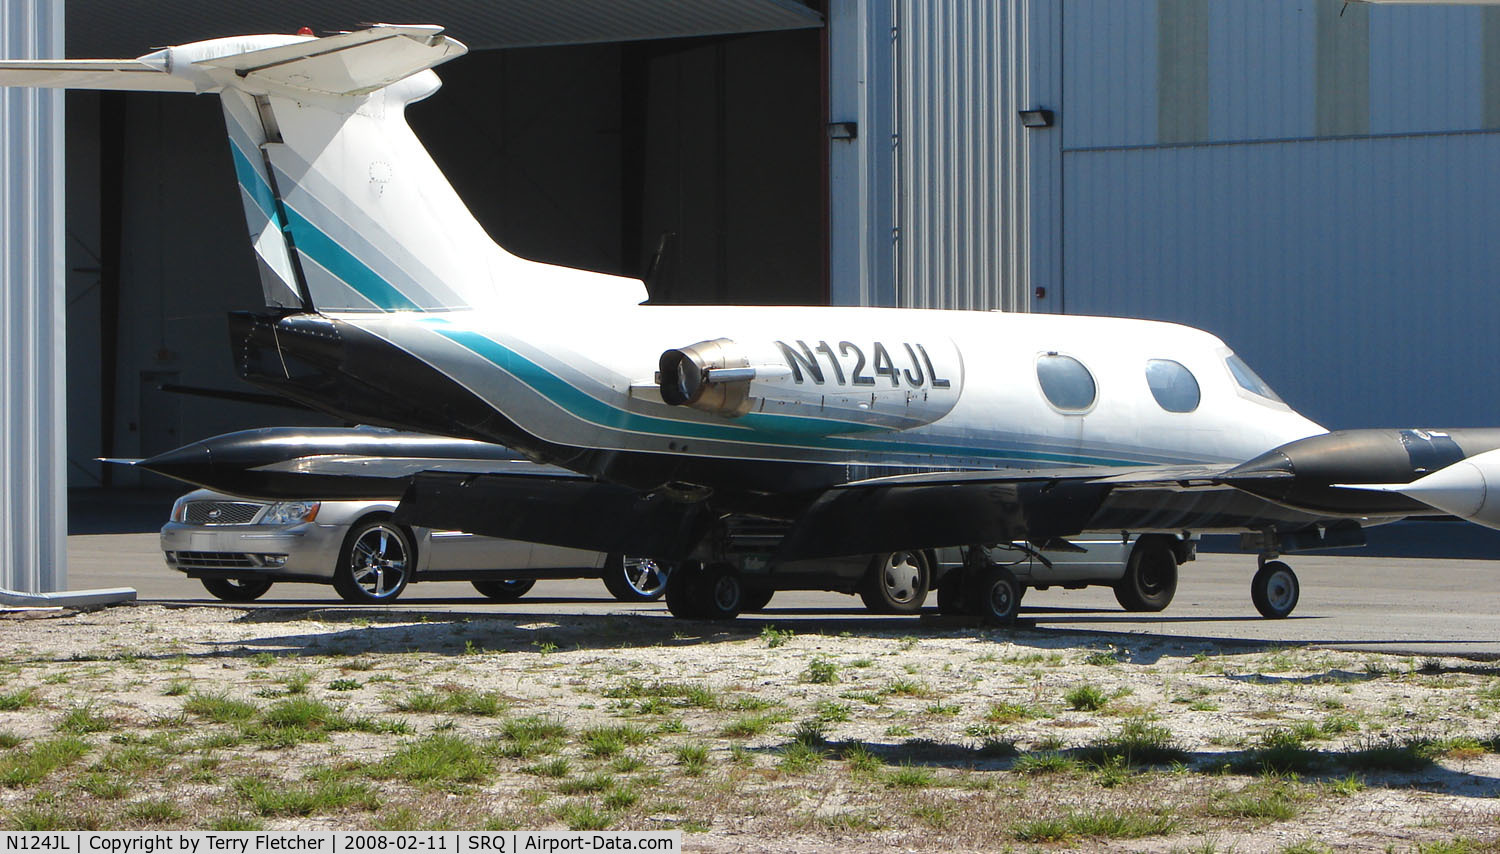 N124JL, 1966 Learjet 24 C/N 24-127, Nice to see a Learjet 24 at Sarasota - although I suspect it does not fly too often these days